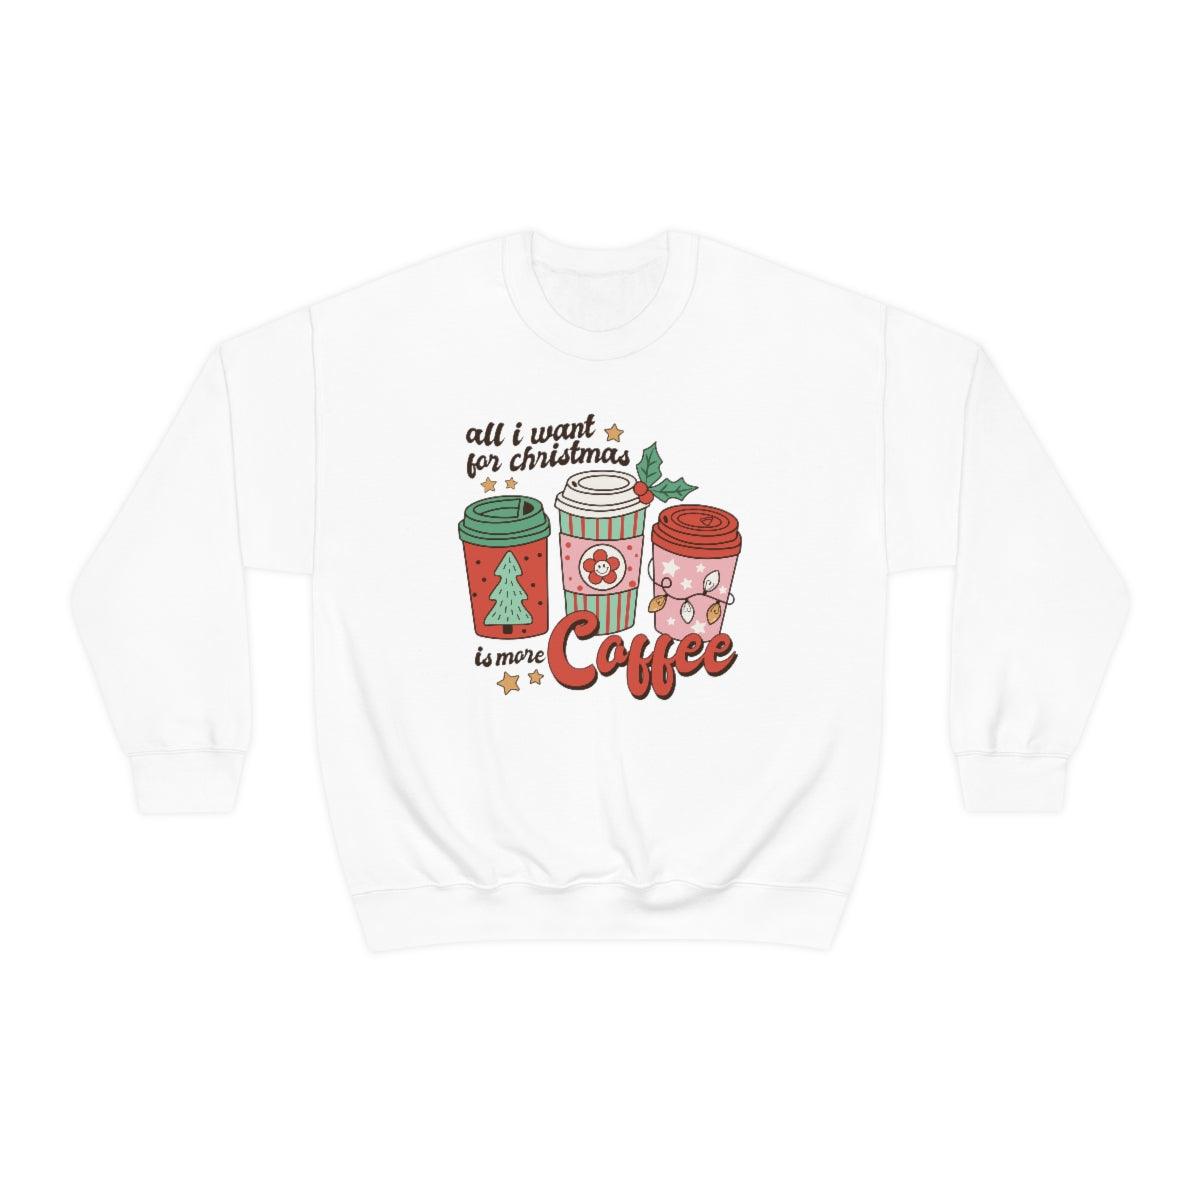 All I want For Christmas Is More Coffee Christmas Crewneck Sweater - Crystal Rose Design Co.